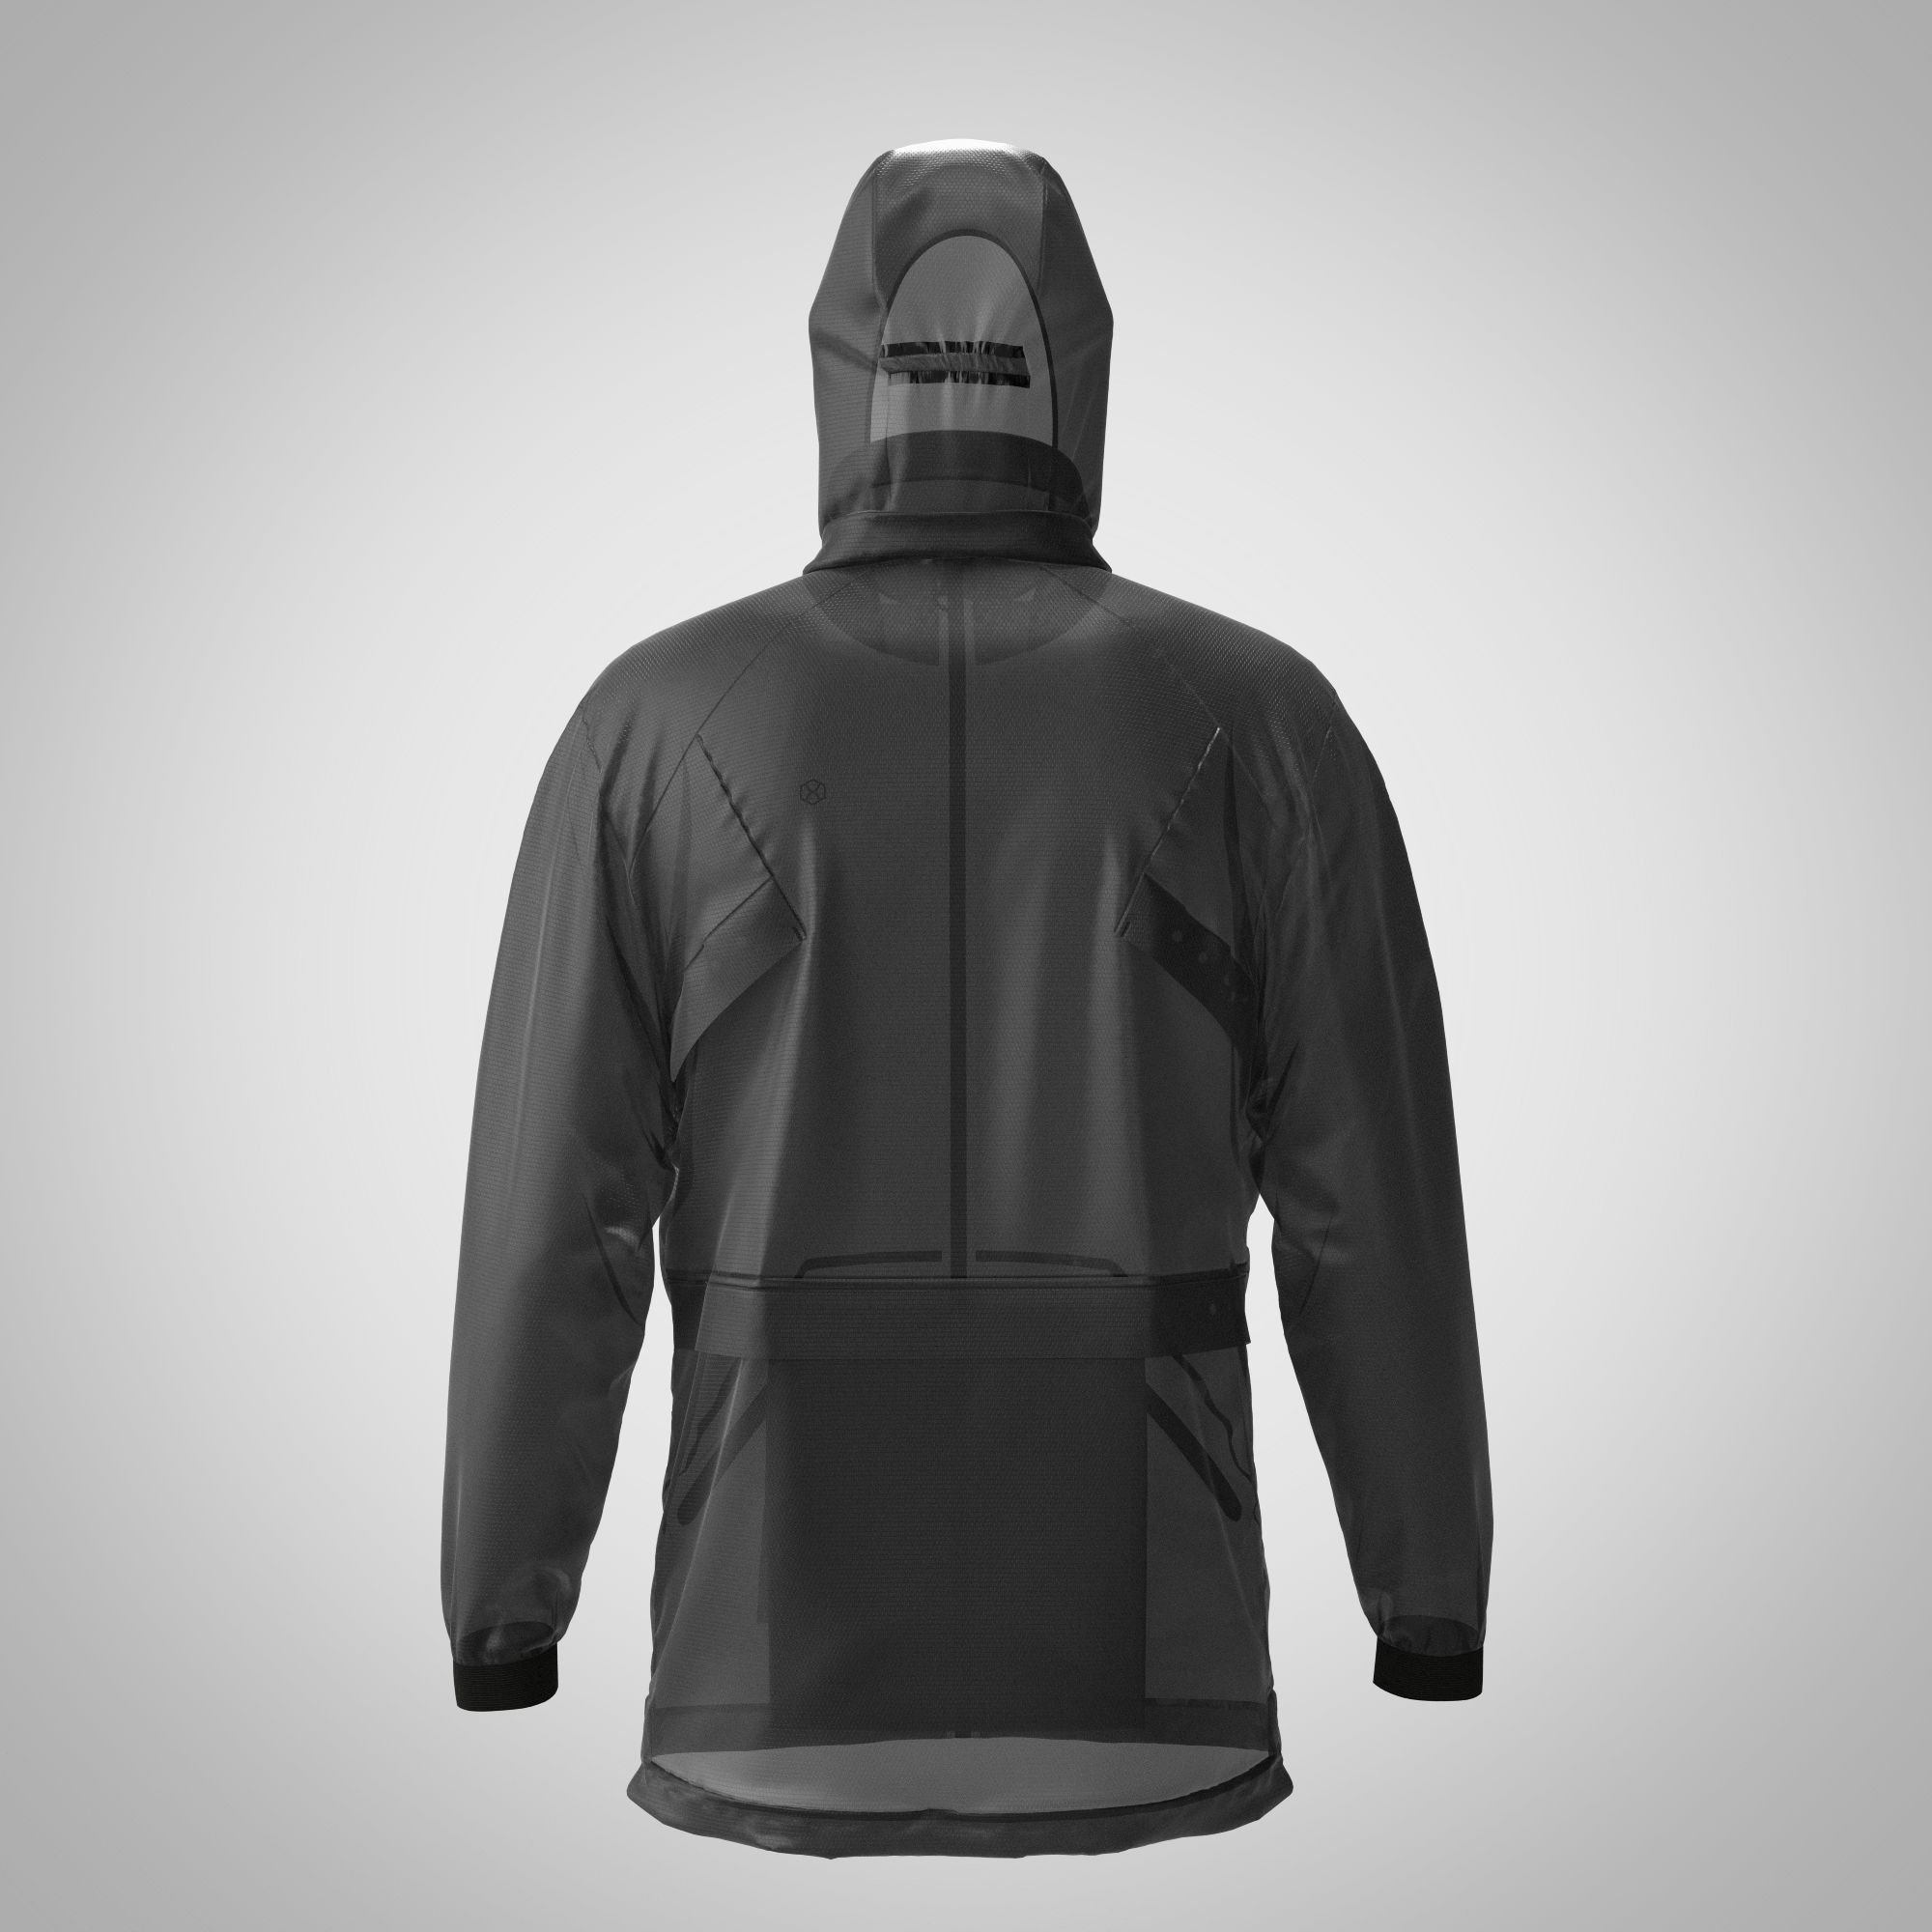 The Nomad(e) Jacket In Black by Graphene-X #15